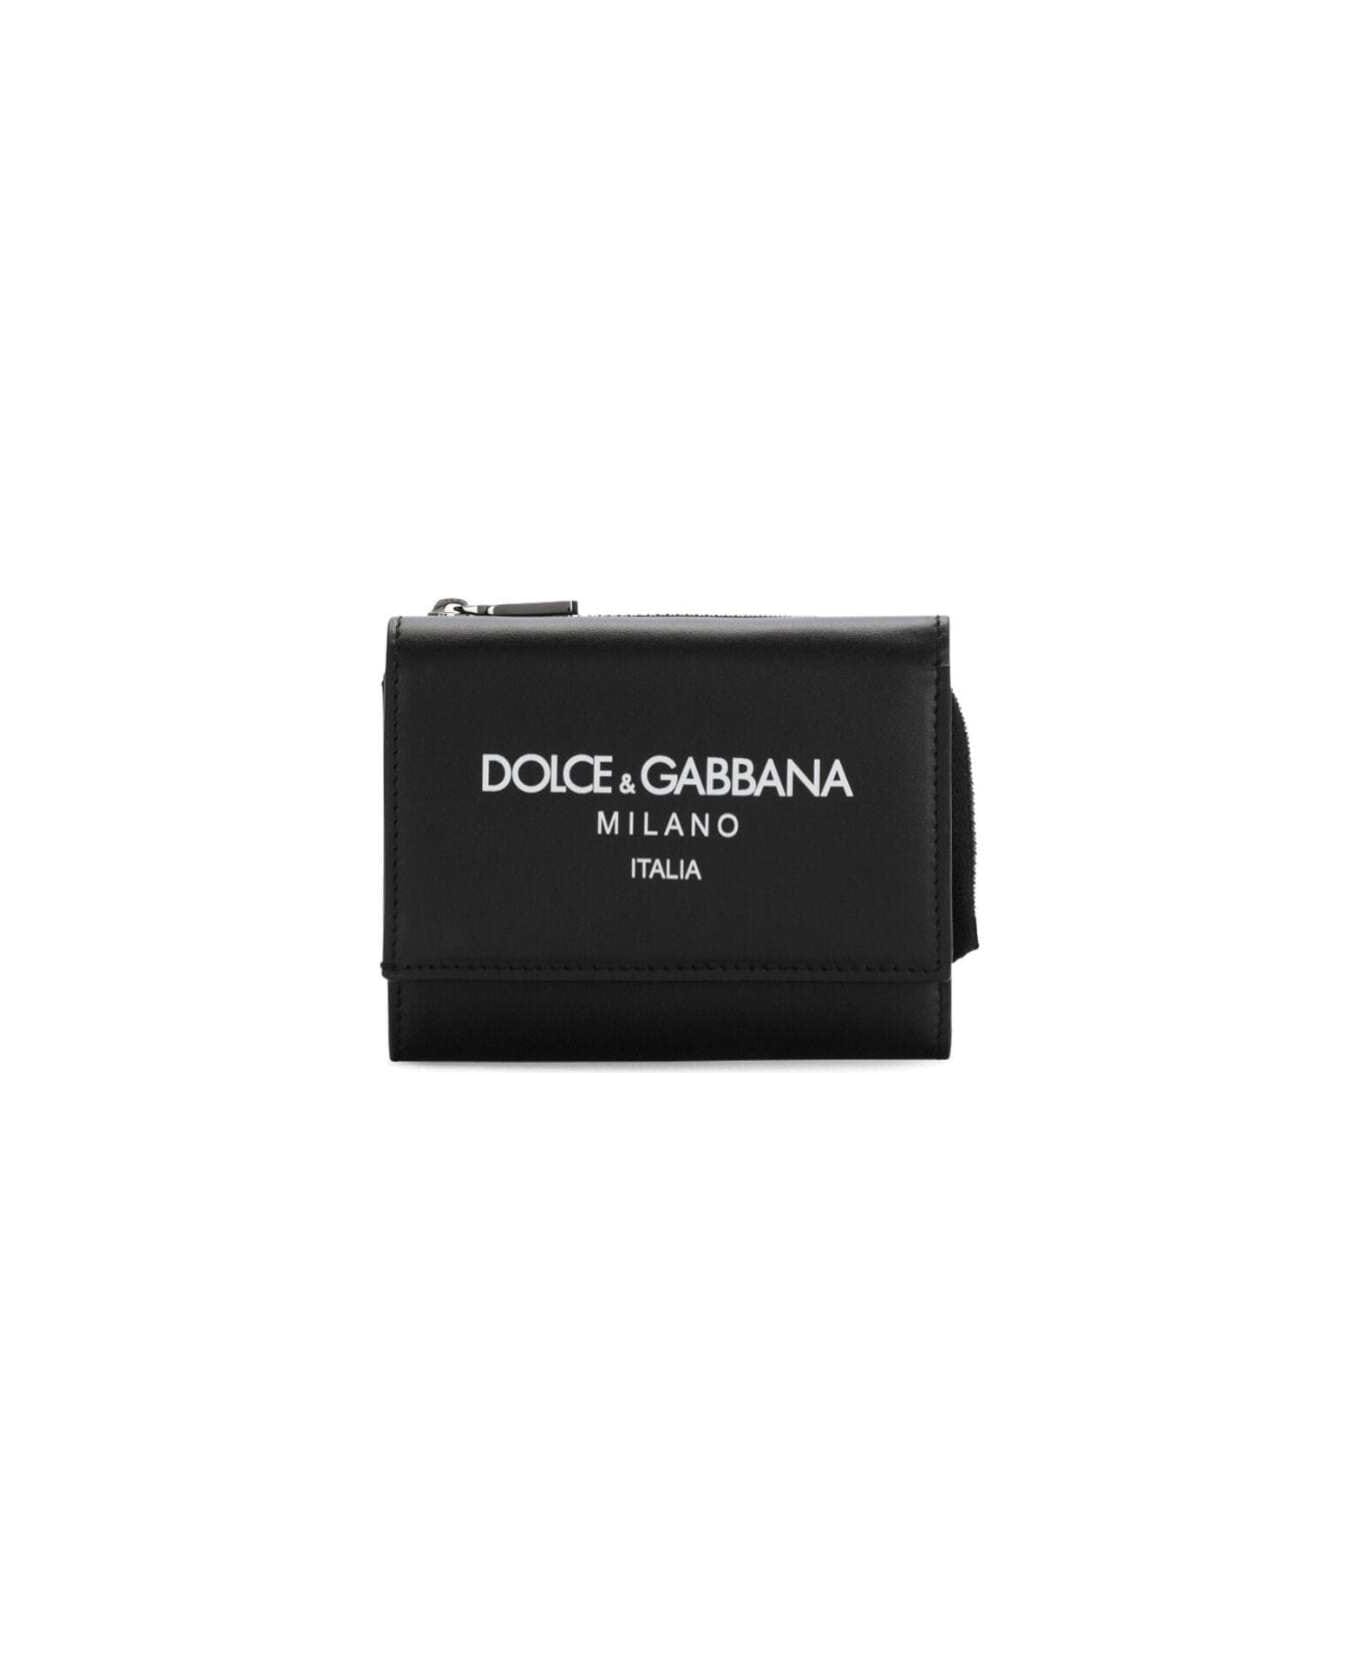 Dolce & Gabbana Black Wallet With Contrasting Logo Print In Leather Man - Black